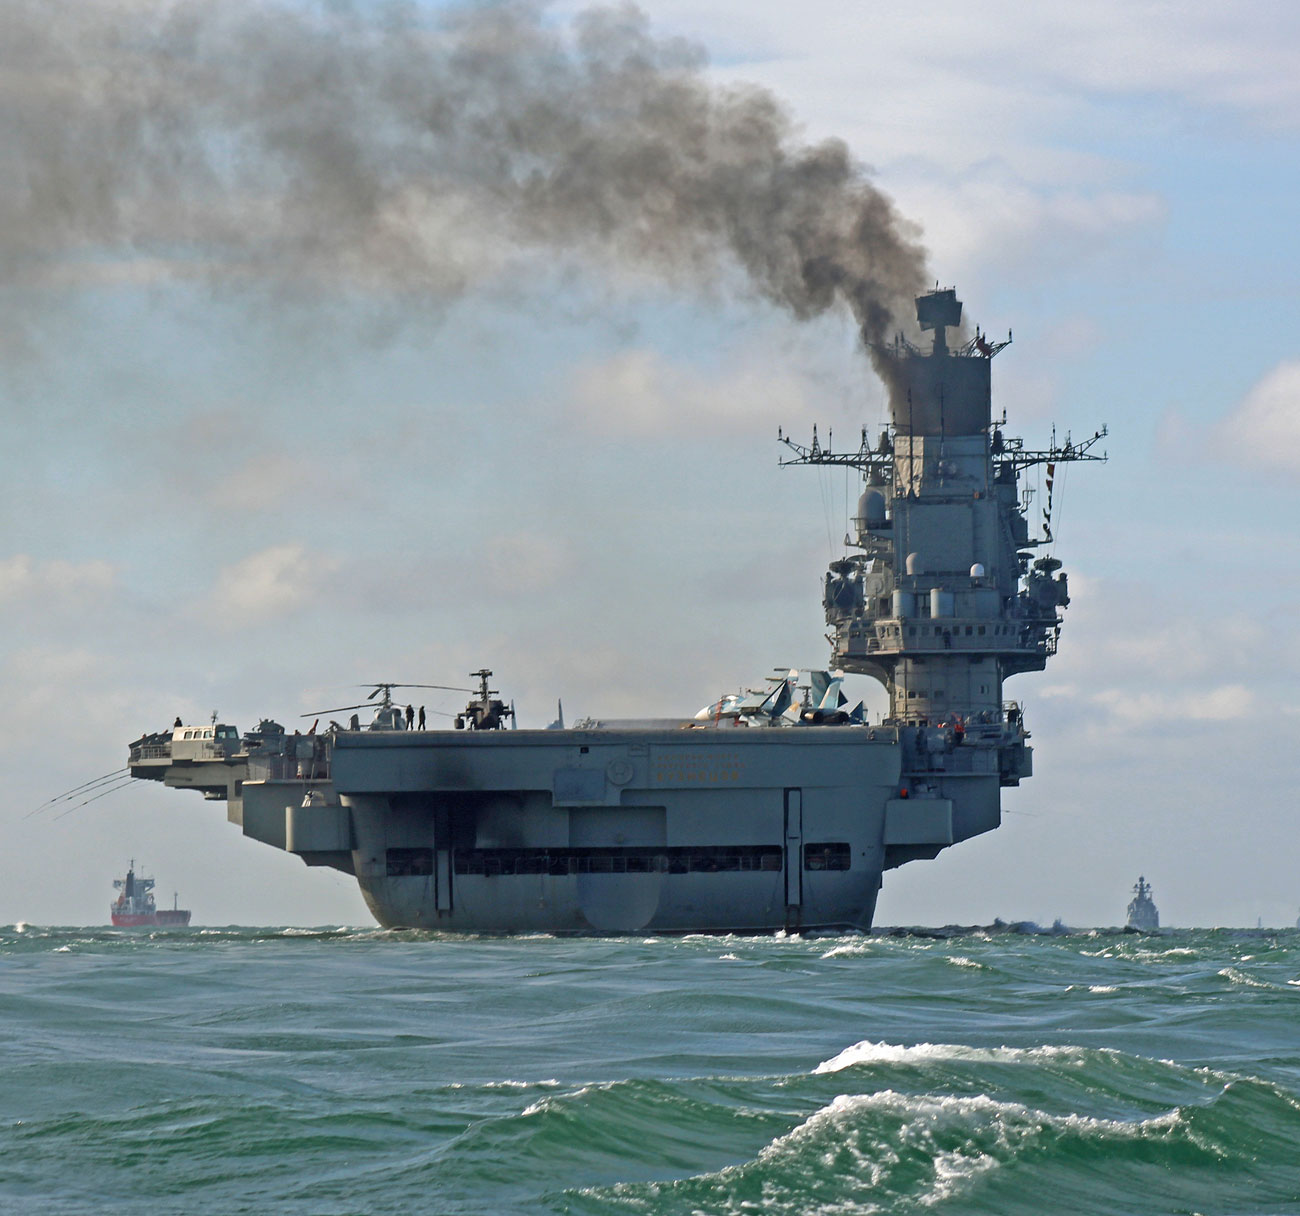 Keep calm: No need to panic over warships in the English Channel